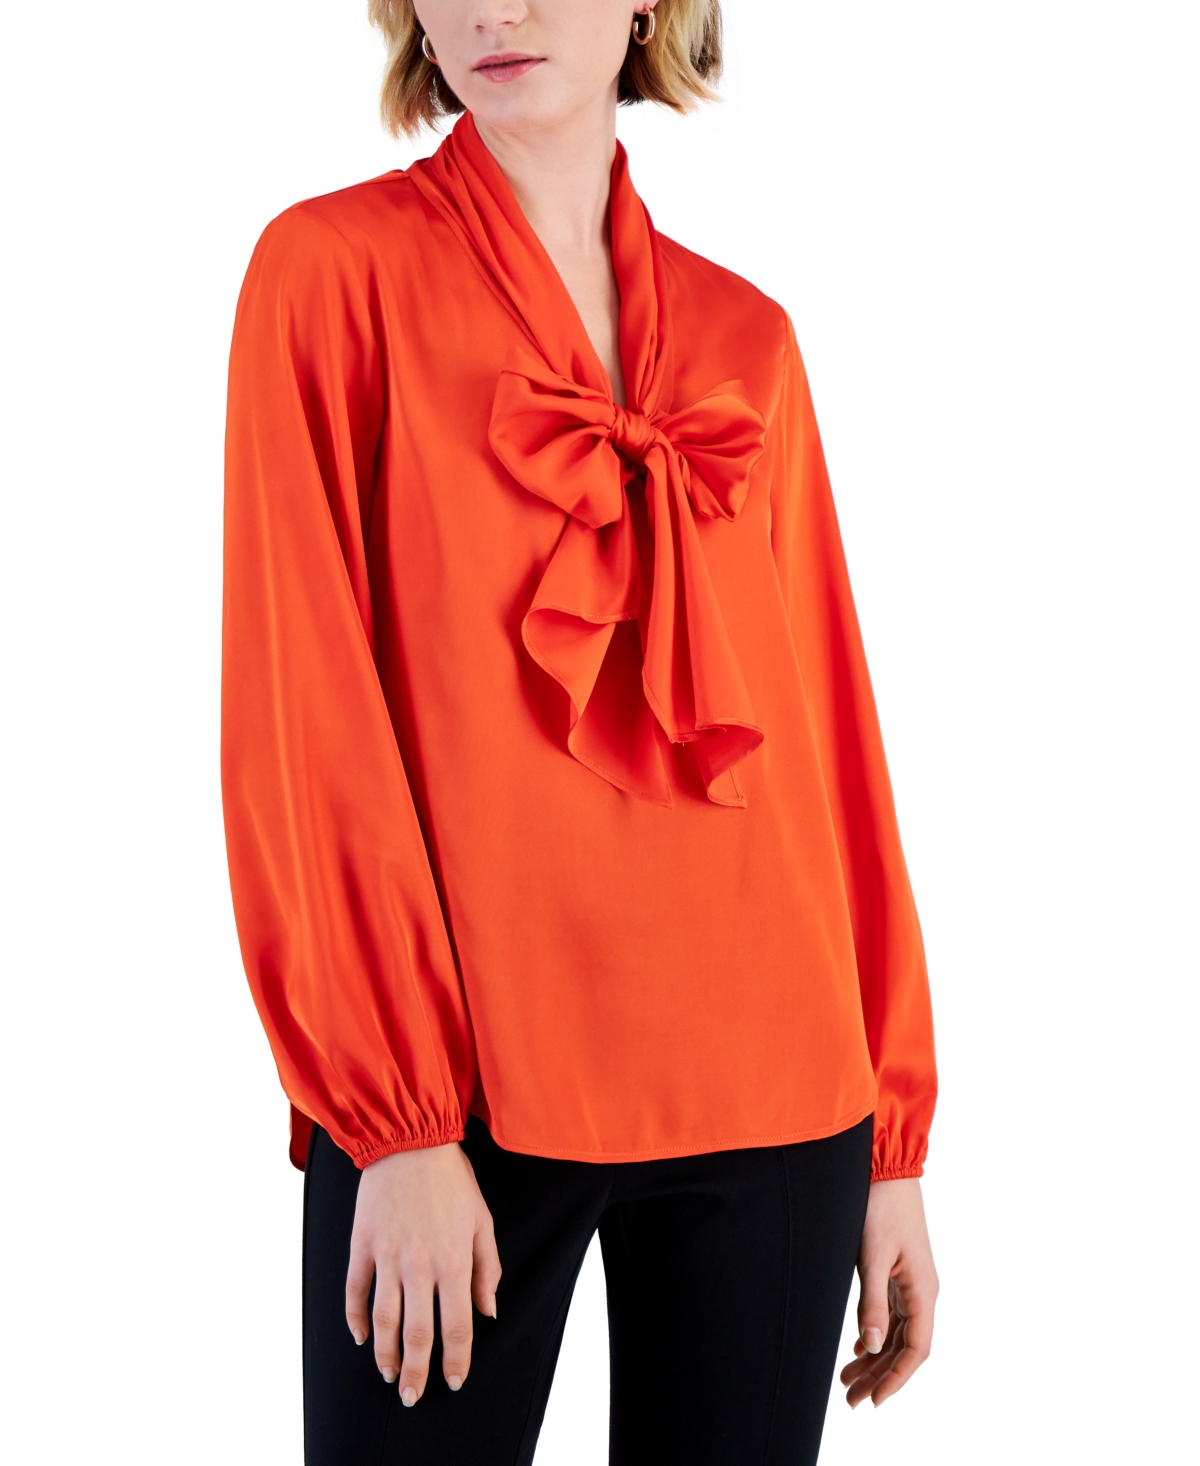 Women's Bow-Tie Long-Sleeve Blouse, Created for Macy's - Spice Orange